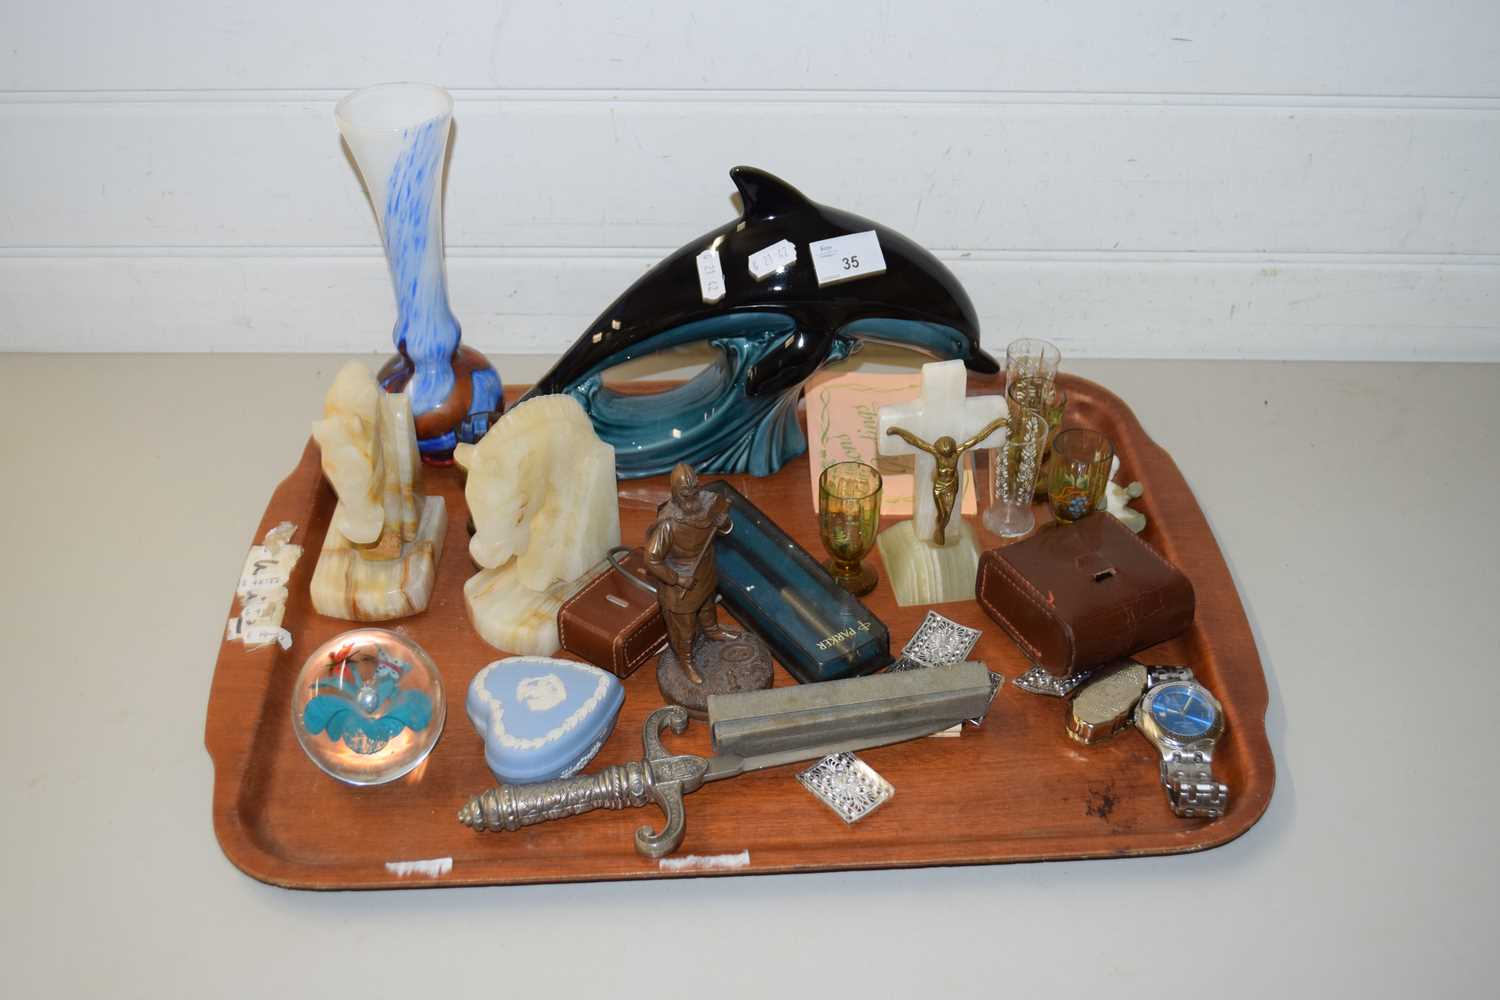 MIXED WARES TO INCLUDE A POOLE POTTERY DOLPHIN, POLISHED STONE BOOKENDS, VARIOUS OTHER SMALL ITEMS